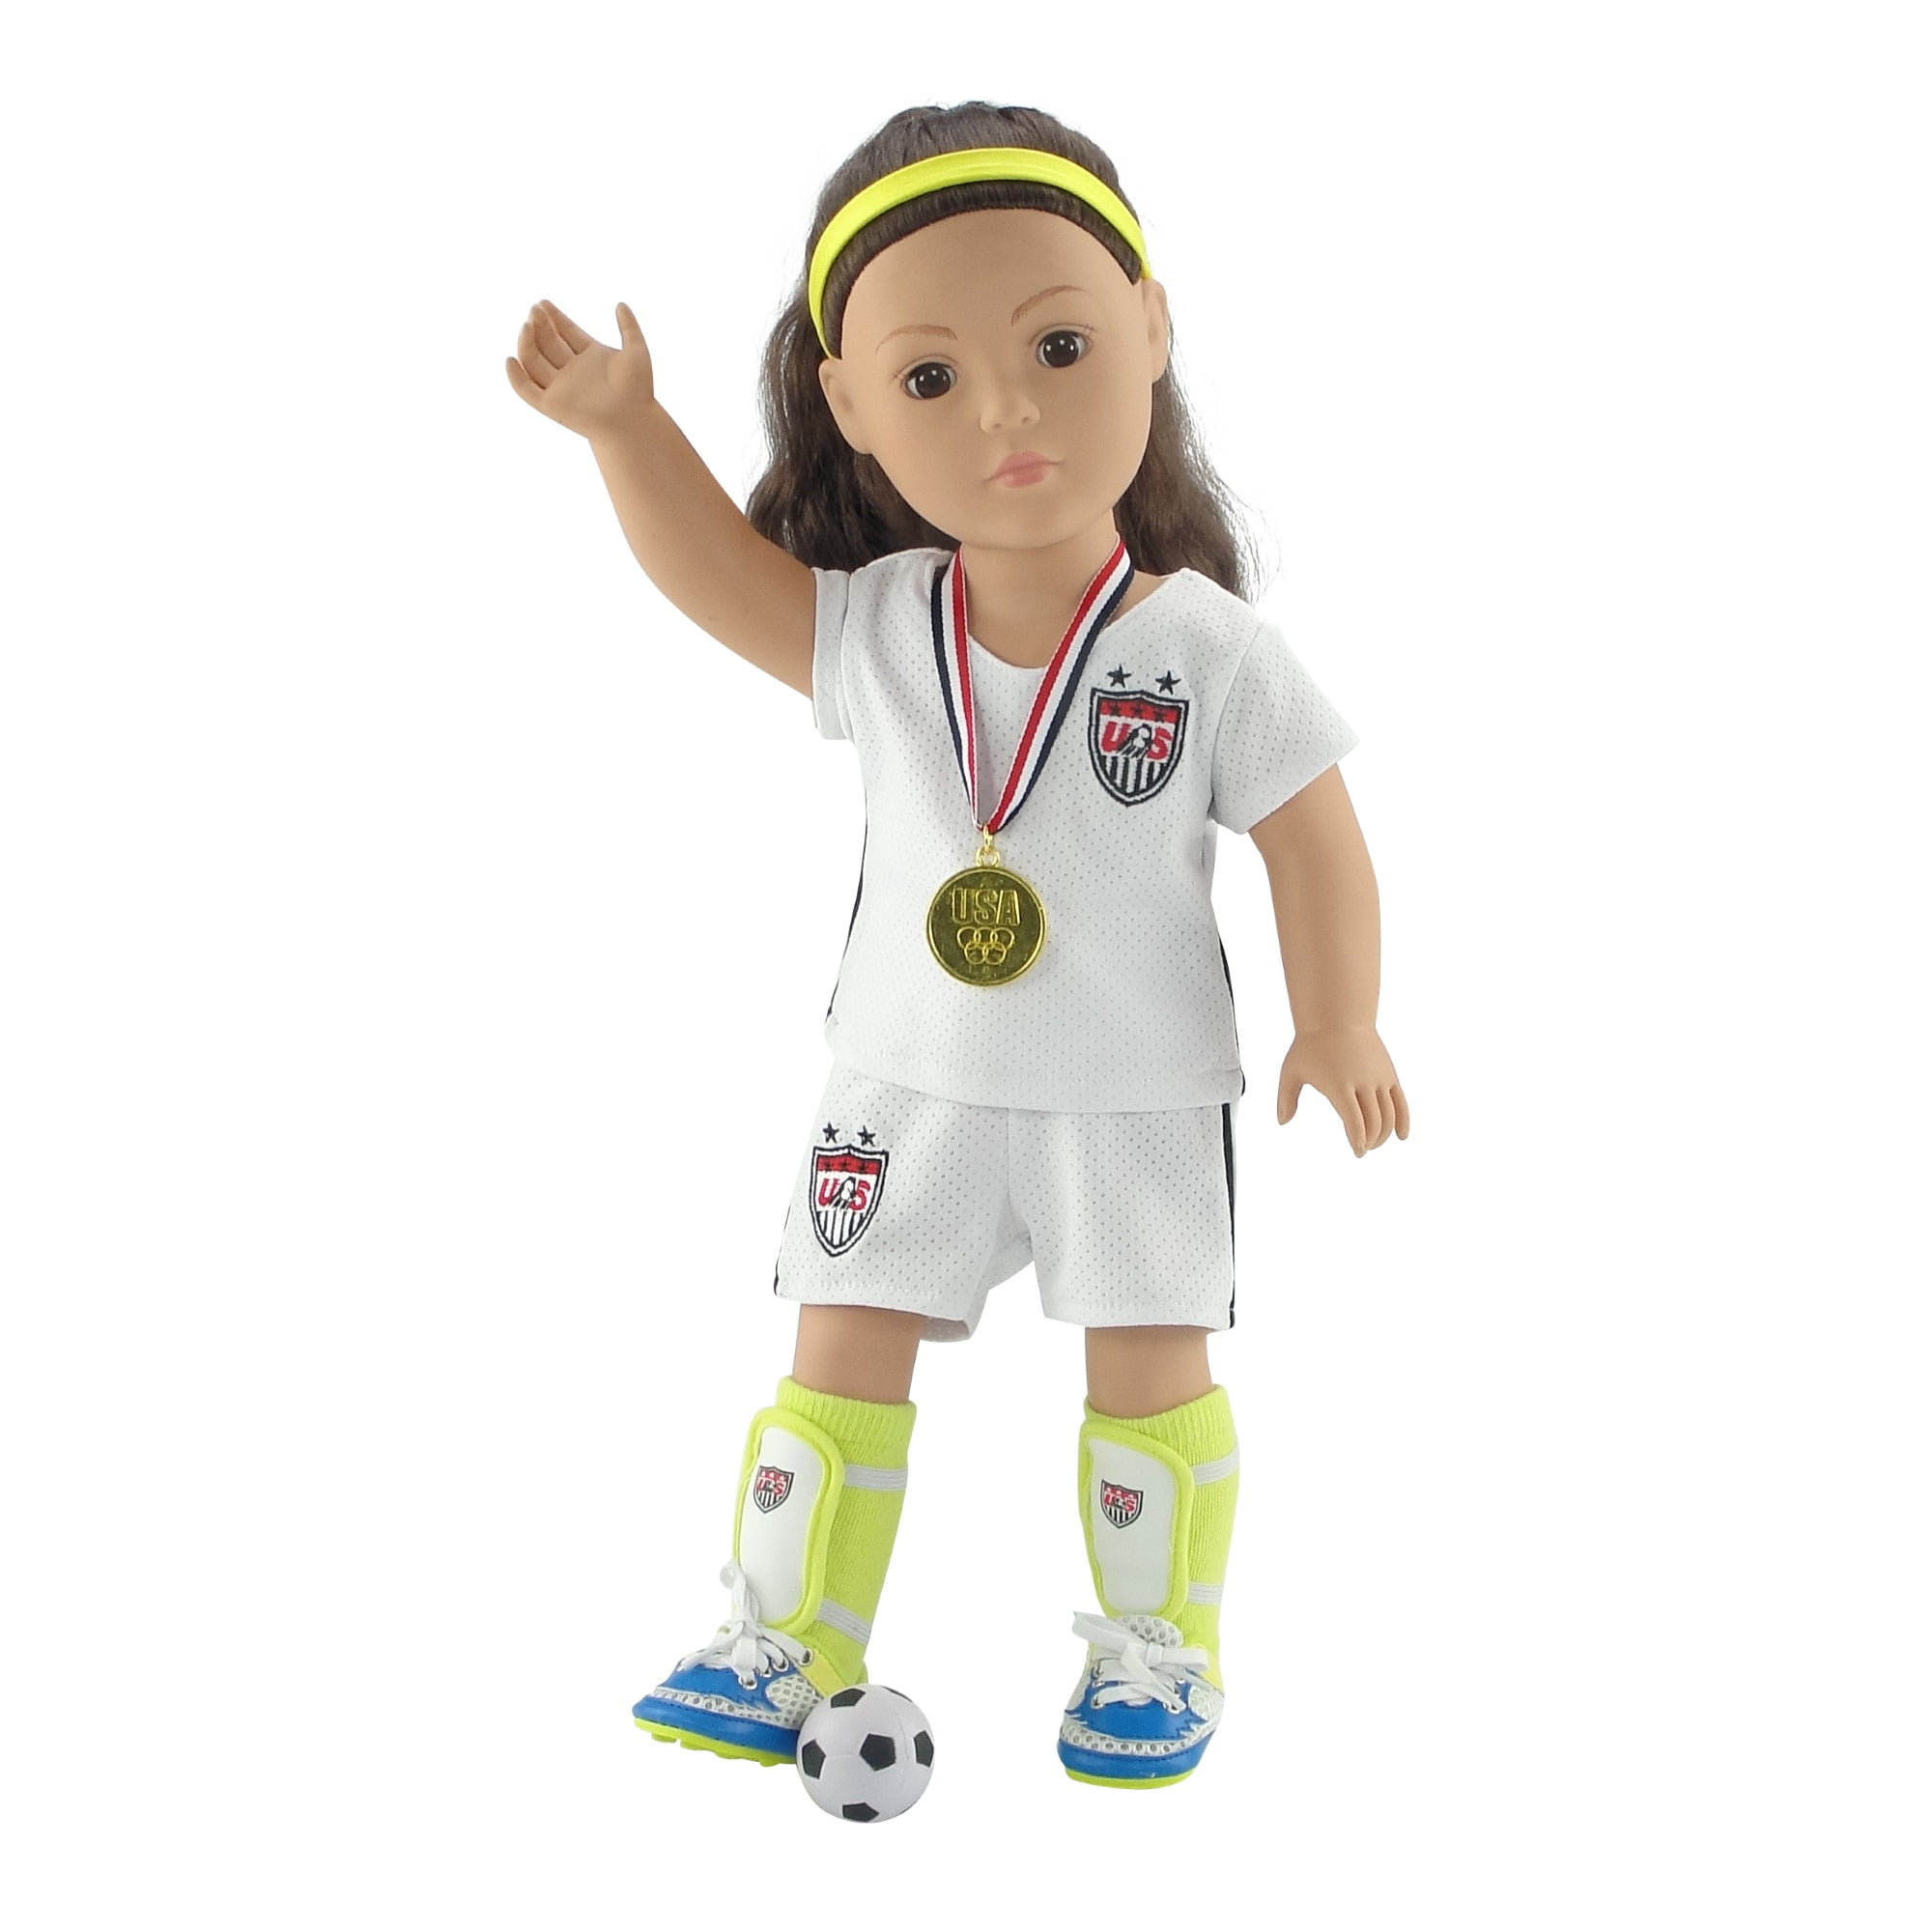 ELJRBCK 18 Inch Doll Clothes-Team USA Soccer Outfits Uniform-Compatible with 18 inch American Girl My Life Doll and Our Generation Doll ect 